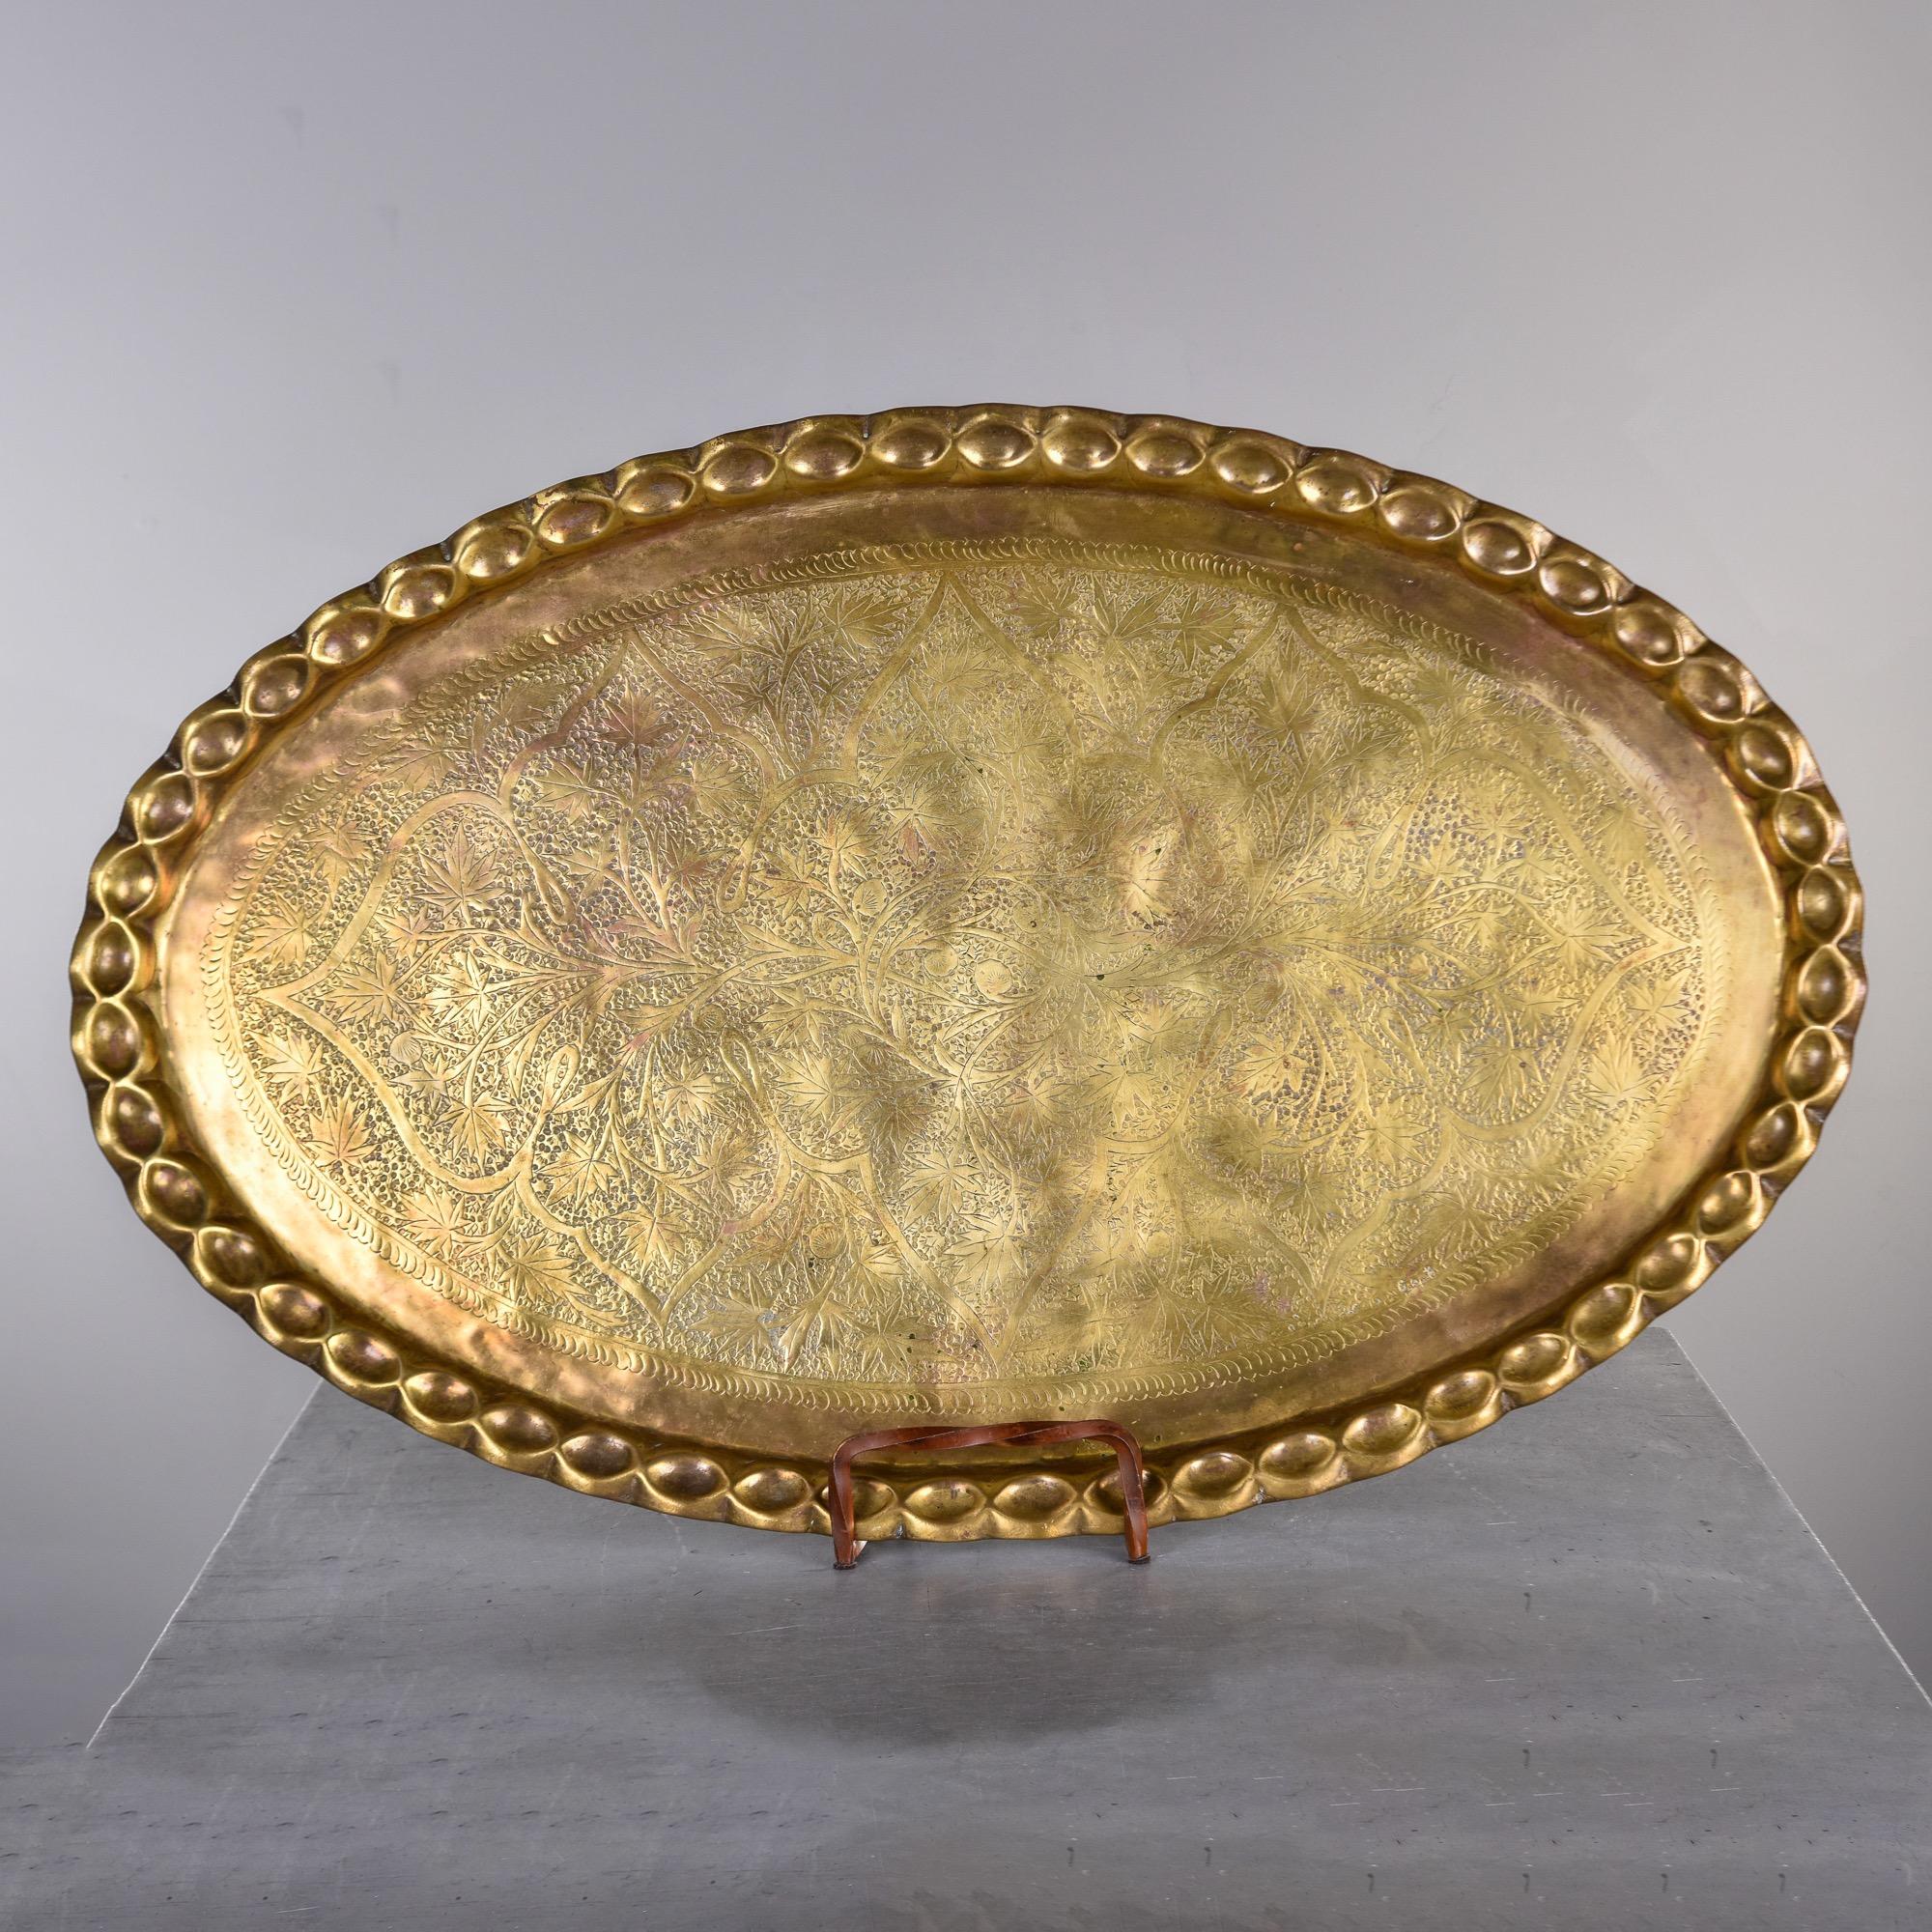 Found in the U.S., this circa 1960 extra large oval brass tray was probably used as a table top along with a folding wood base. We do not have a base, and this piece can certainly be used as a tray. Heavy gauge brass has a scalloped edge and overall